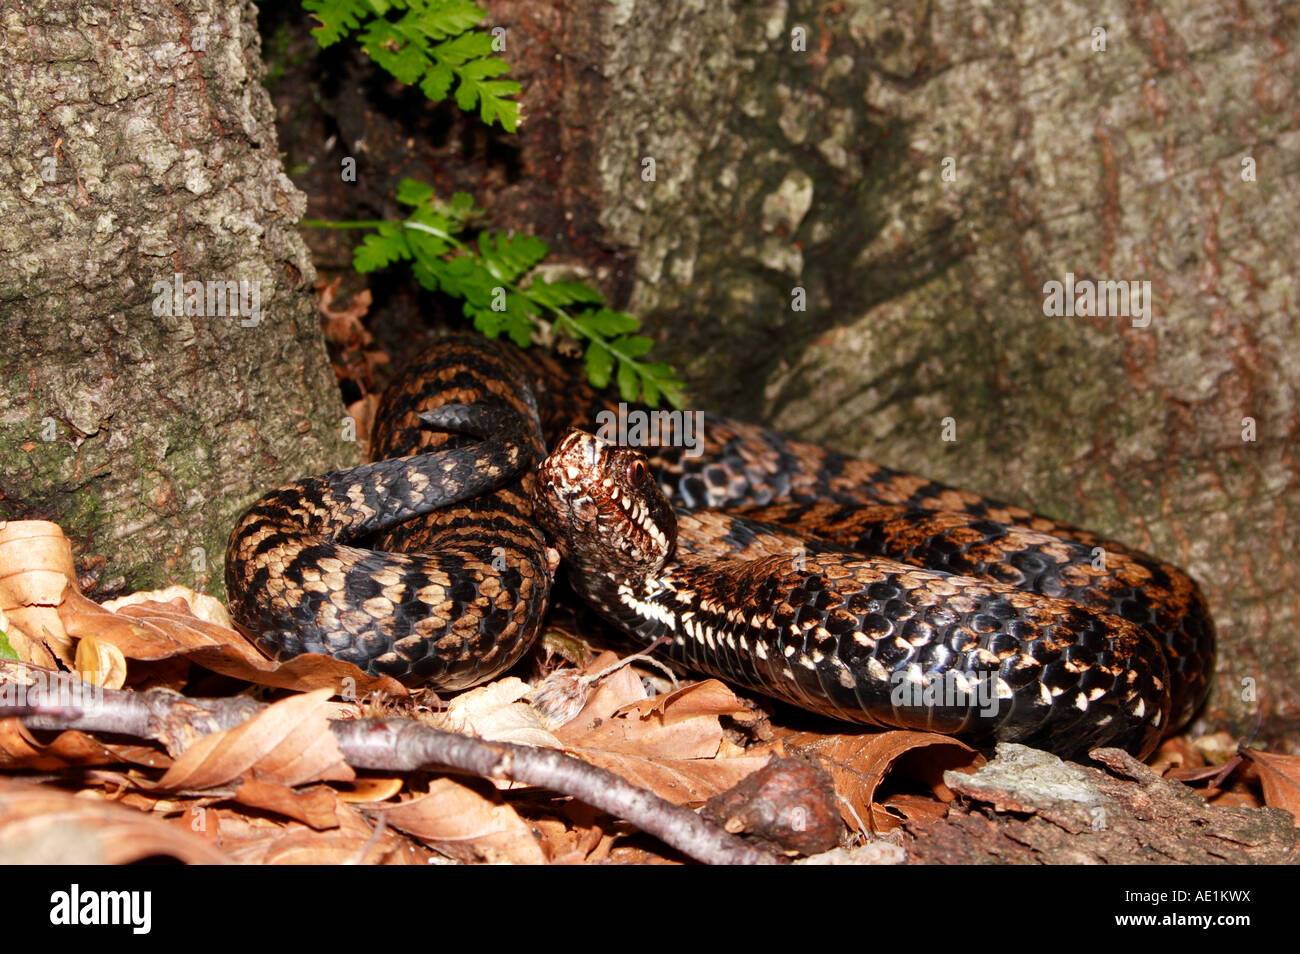 A female adder by tree trunk in Northern Dinaric Mountains (Slovenia - Croatia) Stock Photo